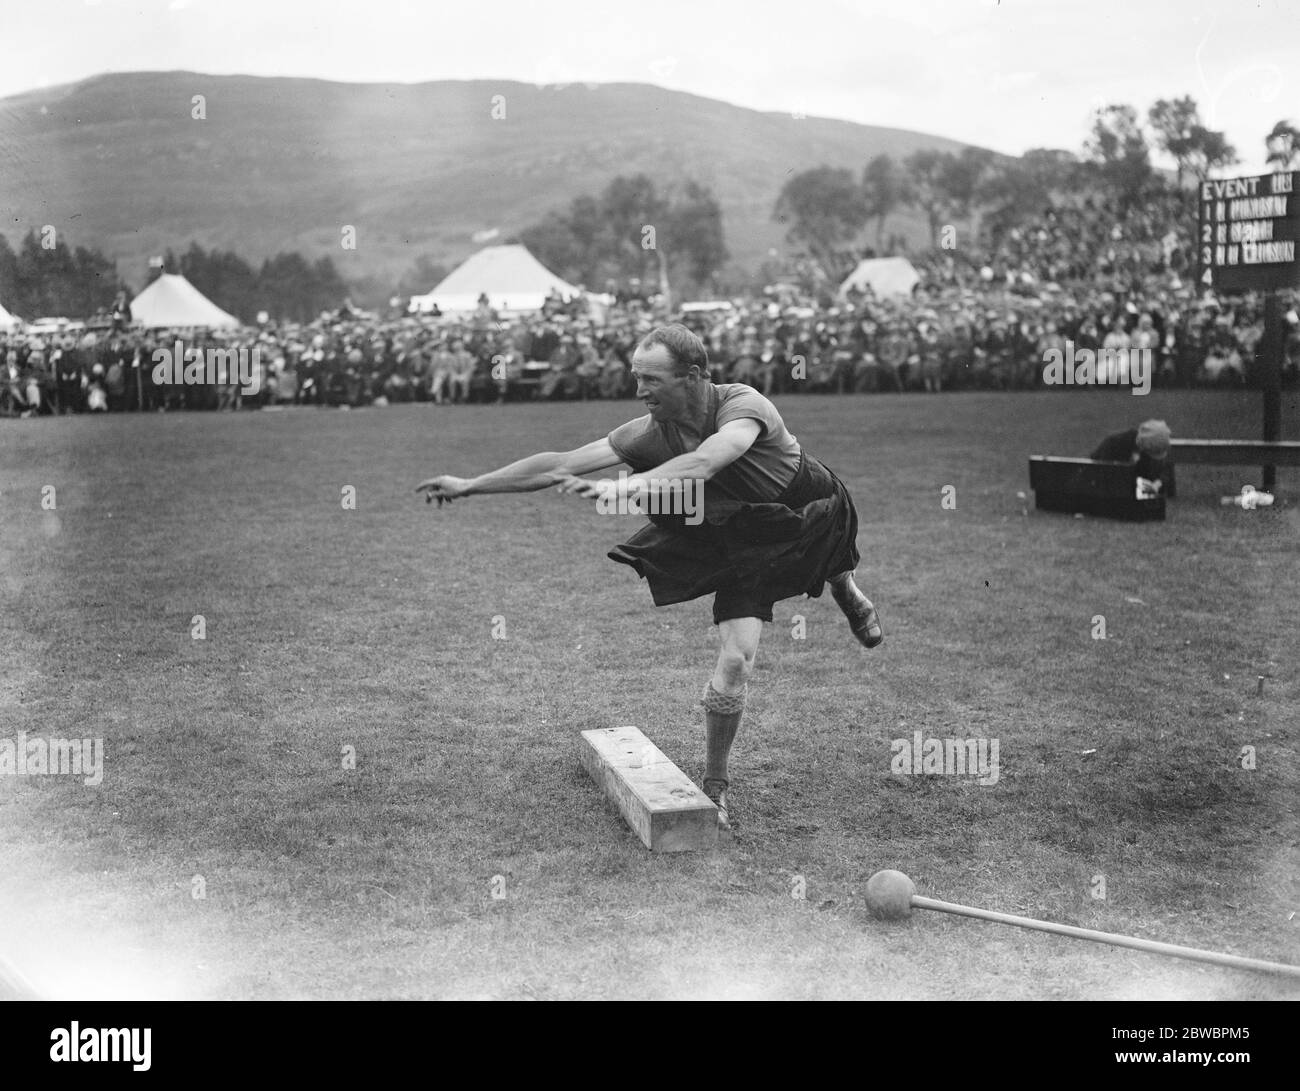 King and Queen at Braemar gathering . D K Michie , winner of putting the 28 lb stone . 7 September 1923 Stock Photo